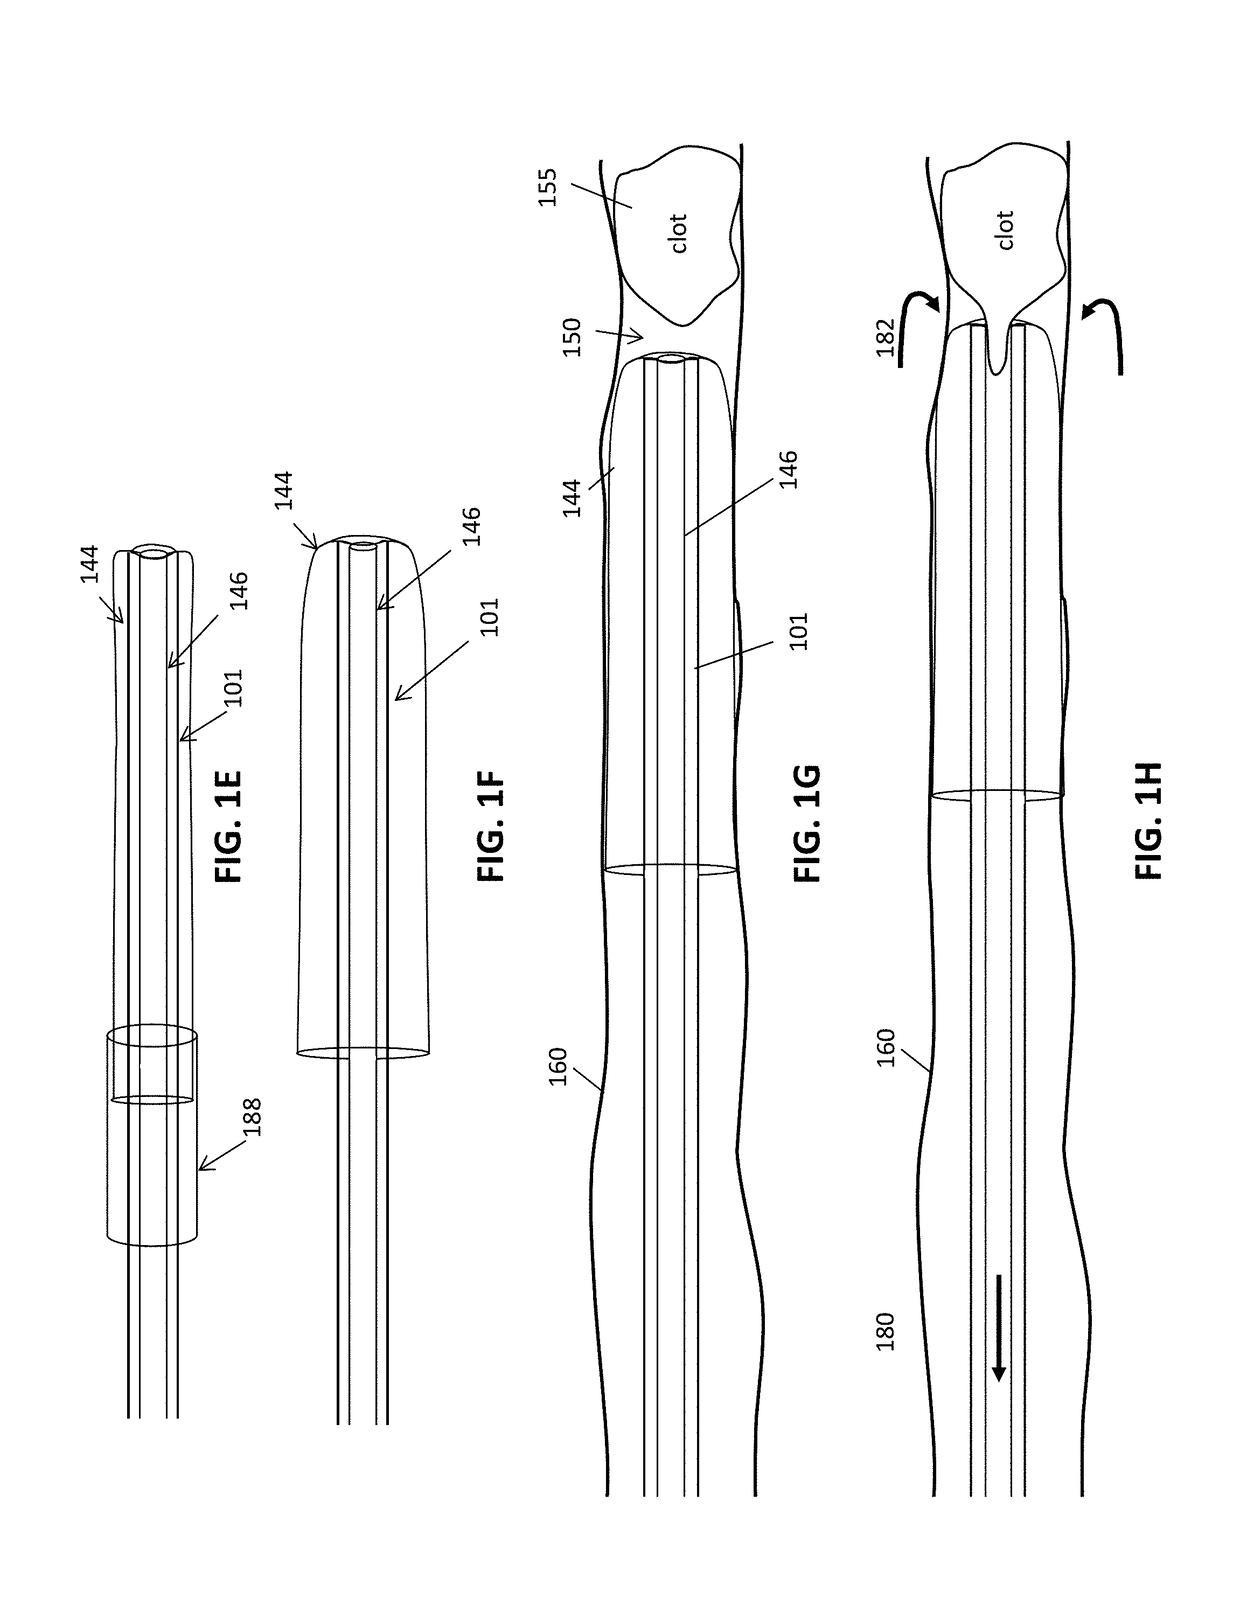 Anti-jamming and macerating thrombectomy apparatuses and methods